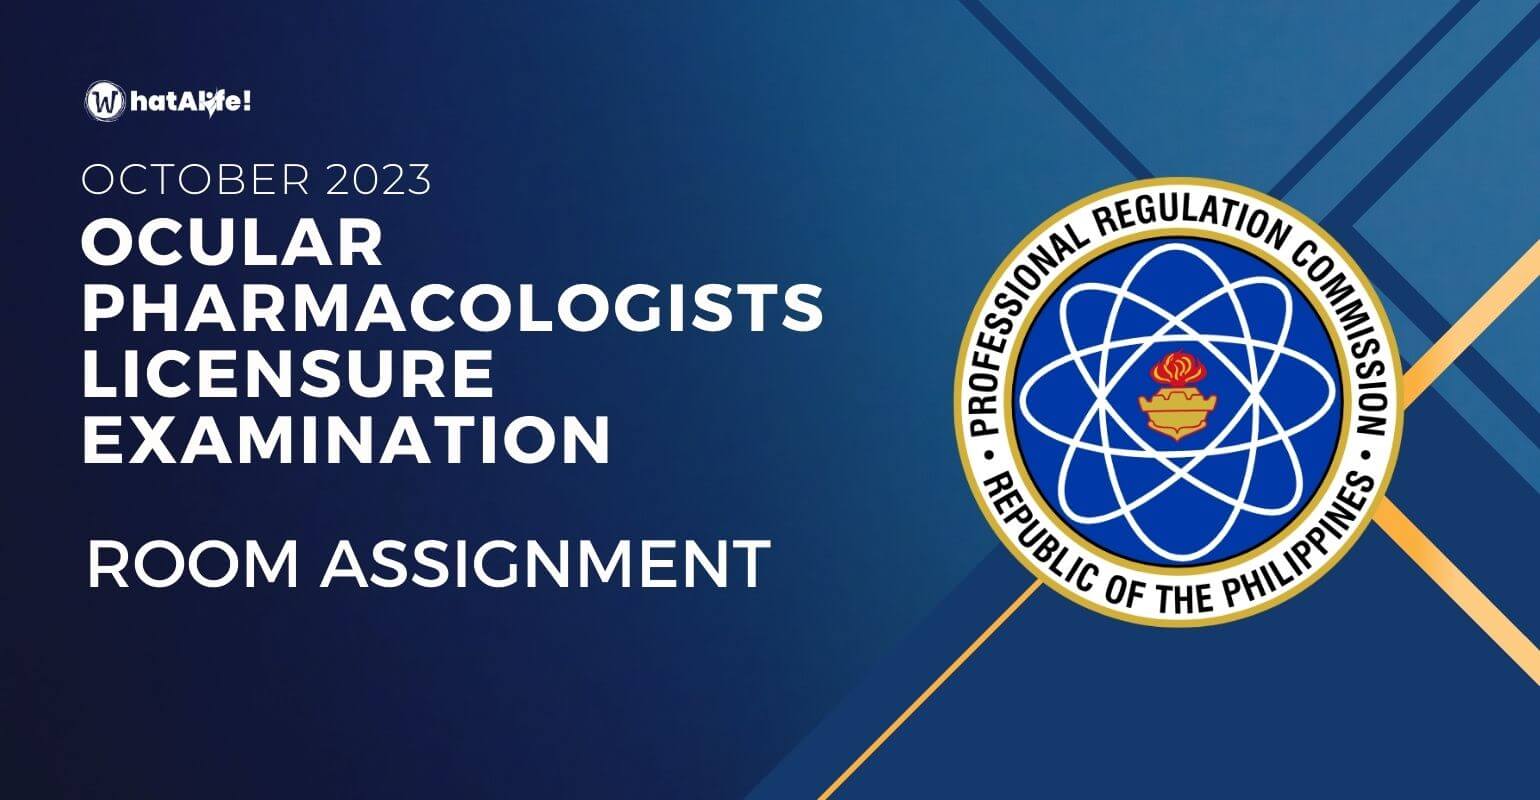 Room Assignment — October 2023 Ocular Pharmacologists Licensure Exam